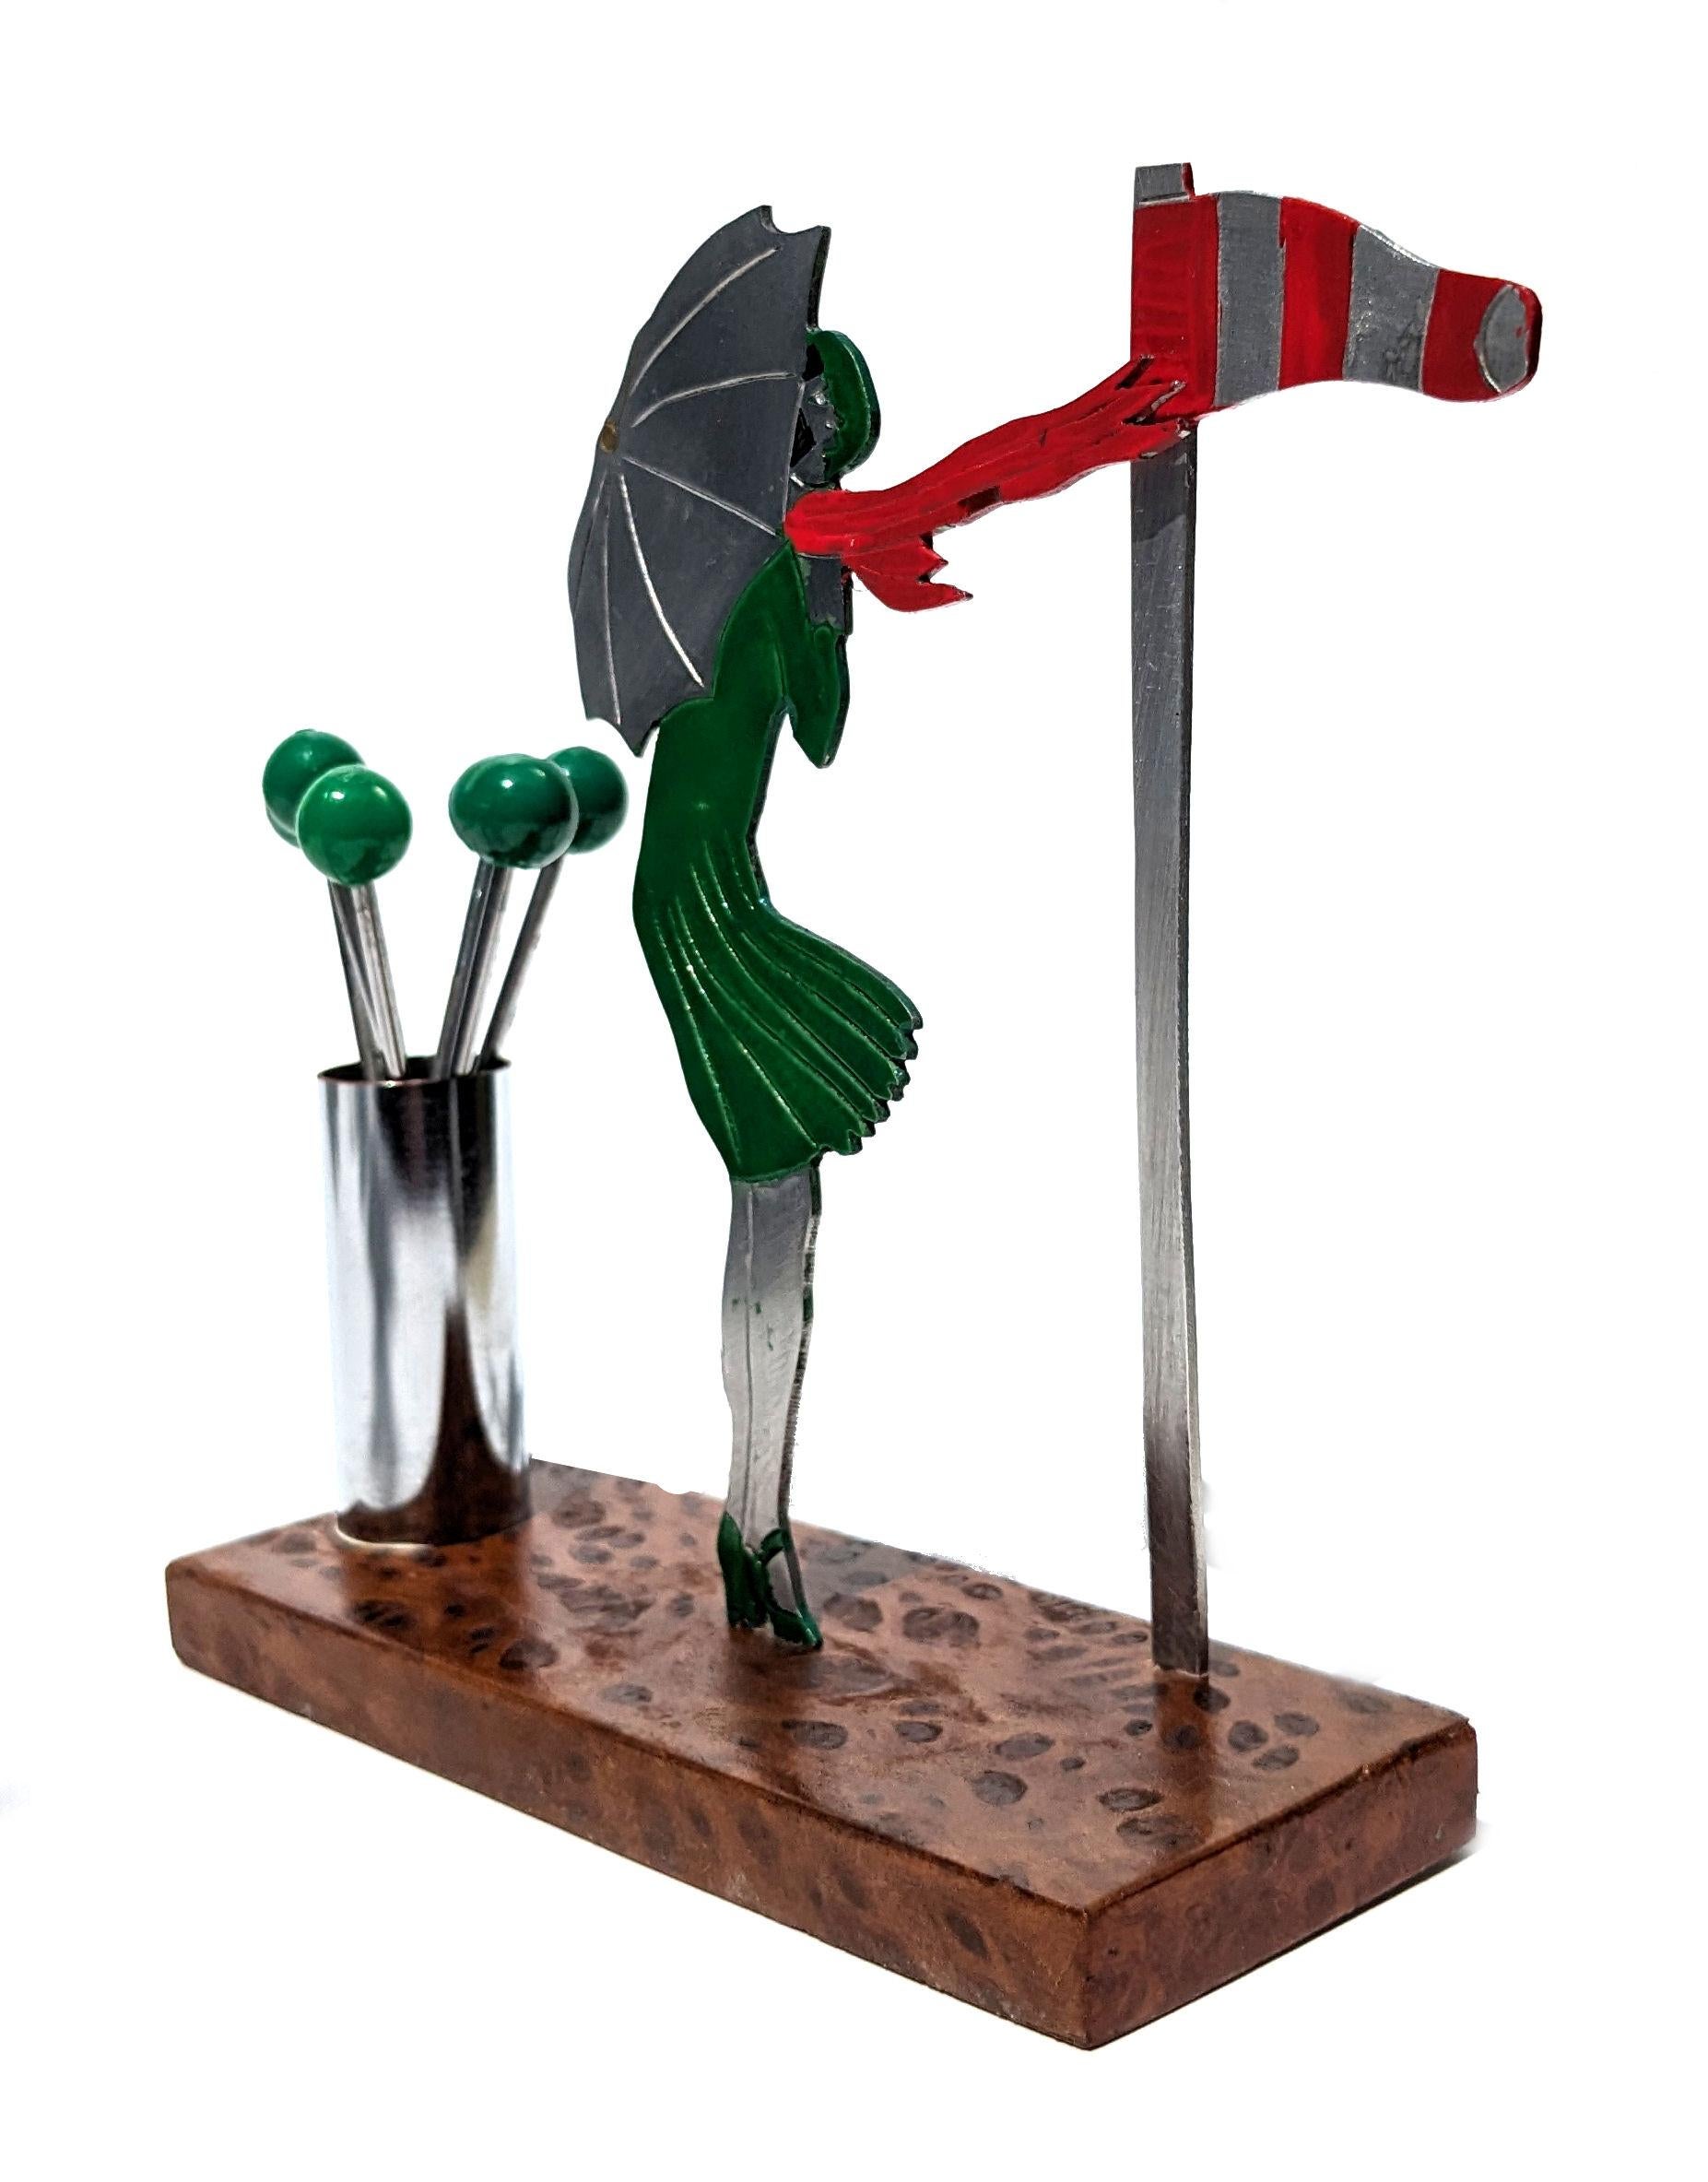 Original French wonderful novelty cocktail stick set unsigned by SUDRE with 6 green bakelite and chrome cocktail sticks. These sets are very rare and sought after , dating from the 1930s. A two dimensional coloured aluminium figural cocktail pick